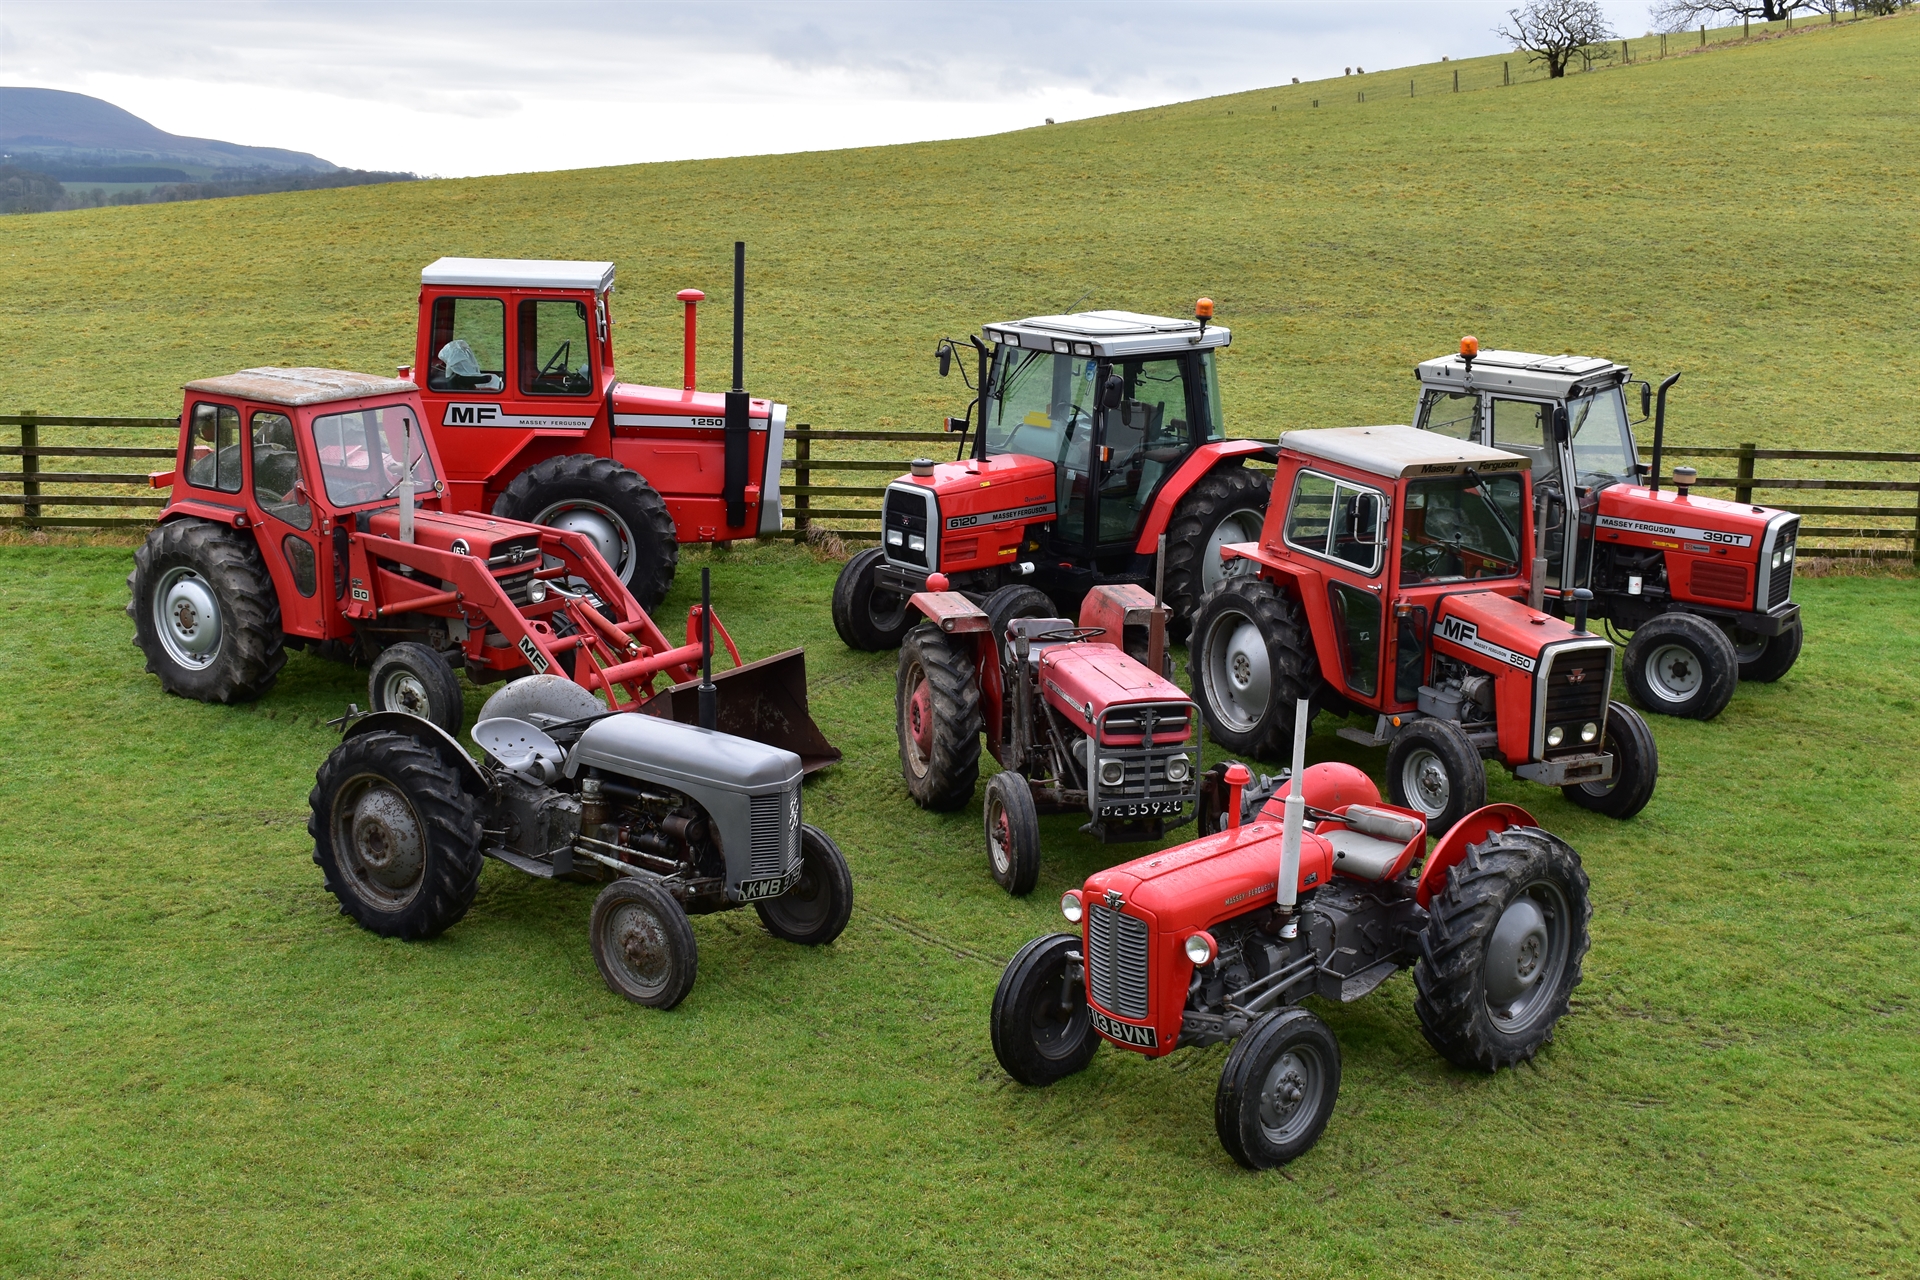 Epic Massey Ferguson collection sold in Skipton, Yorkshire